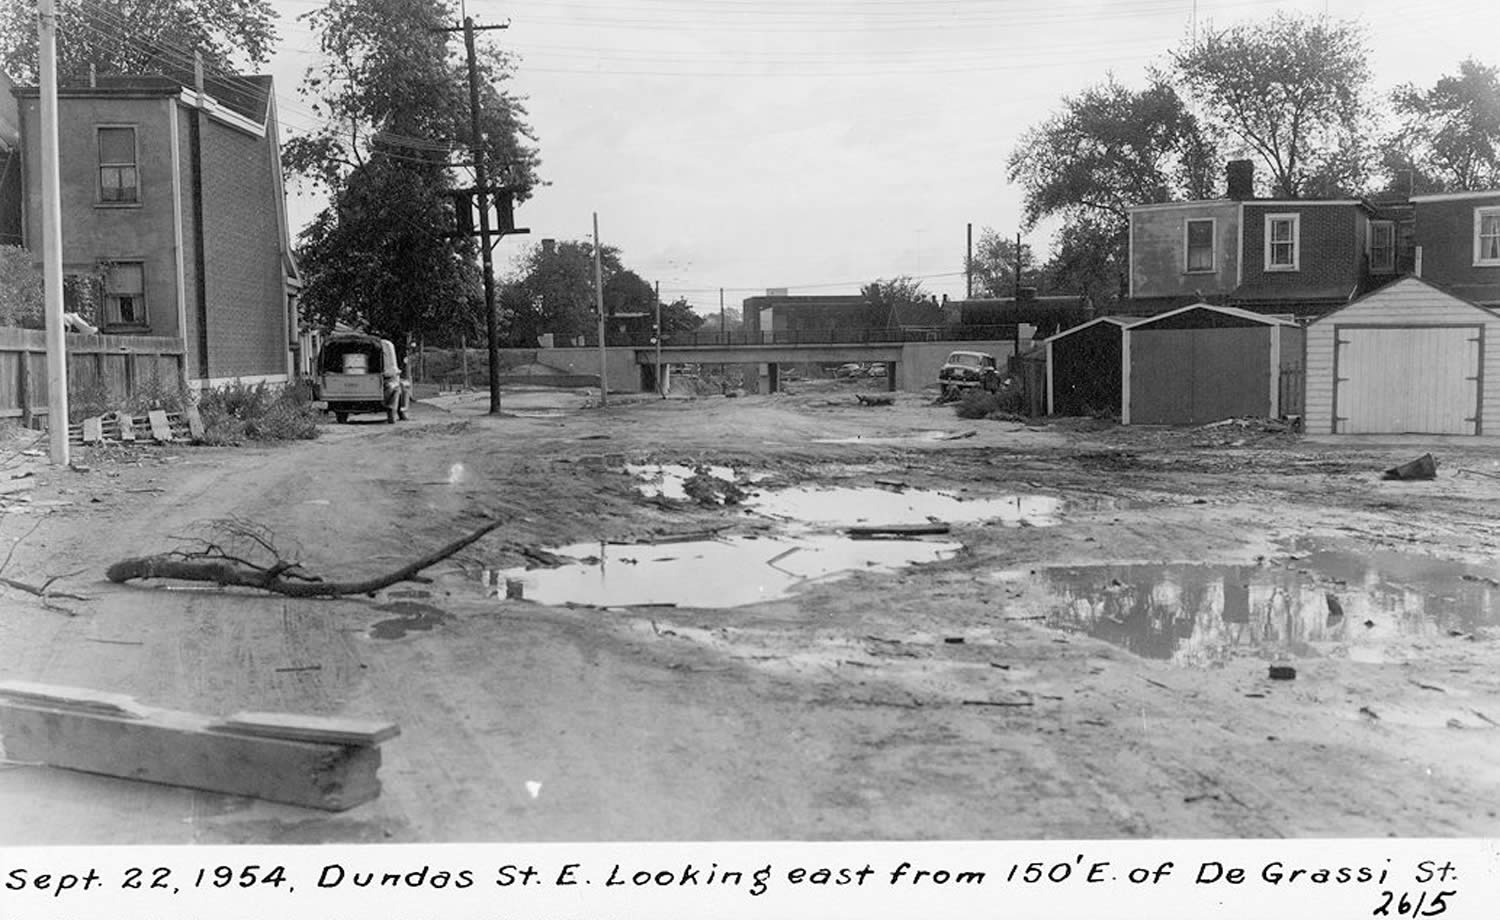 Black and white photograph of an unpaved, muddy street with a rail overpass in the background. Houses are on both sides of the street, with their garages visible.